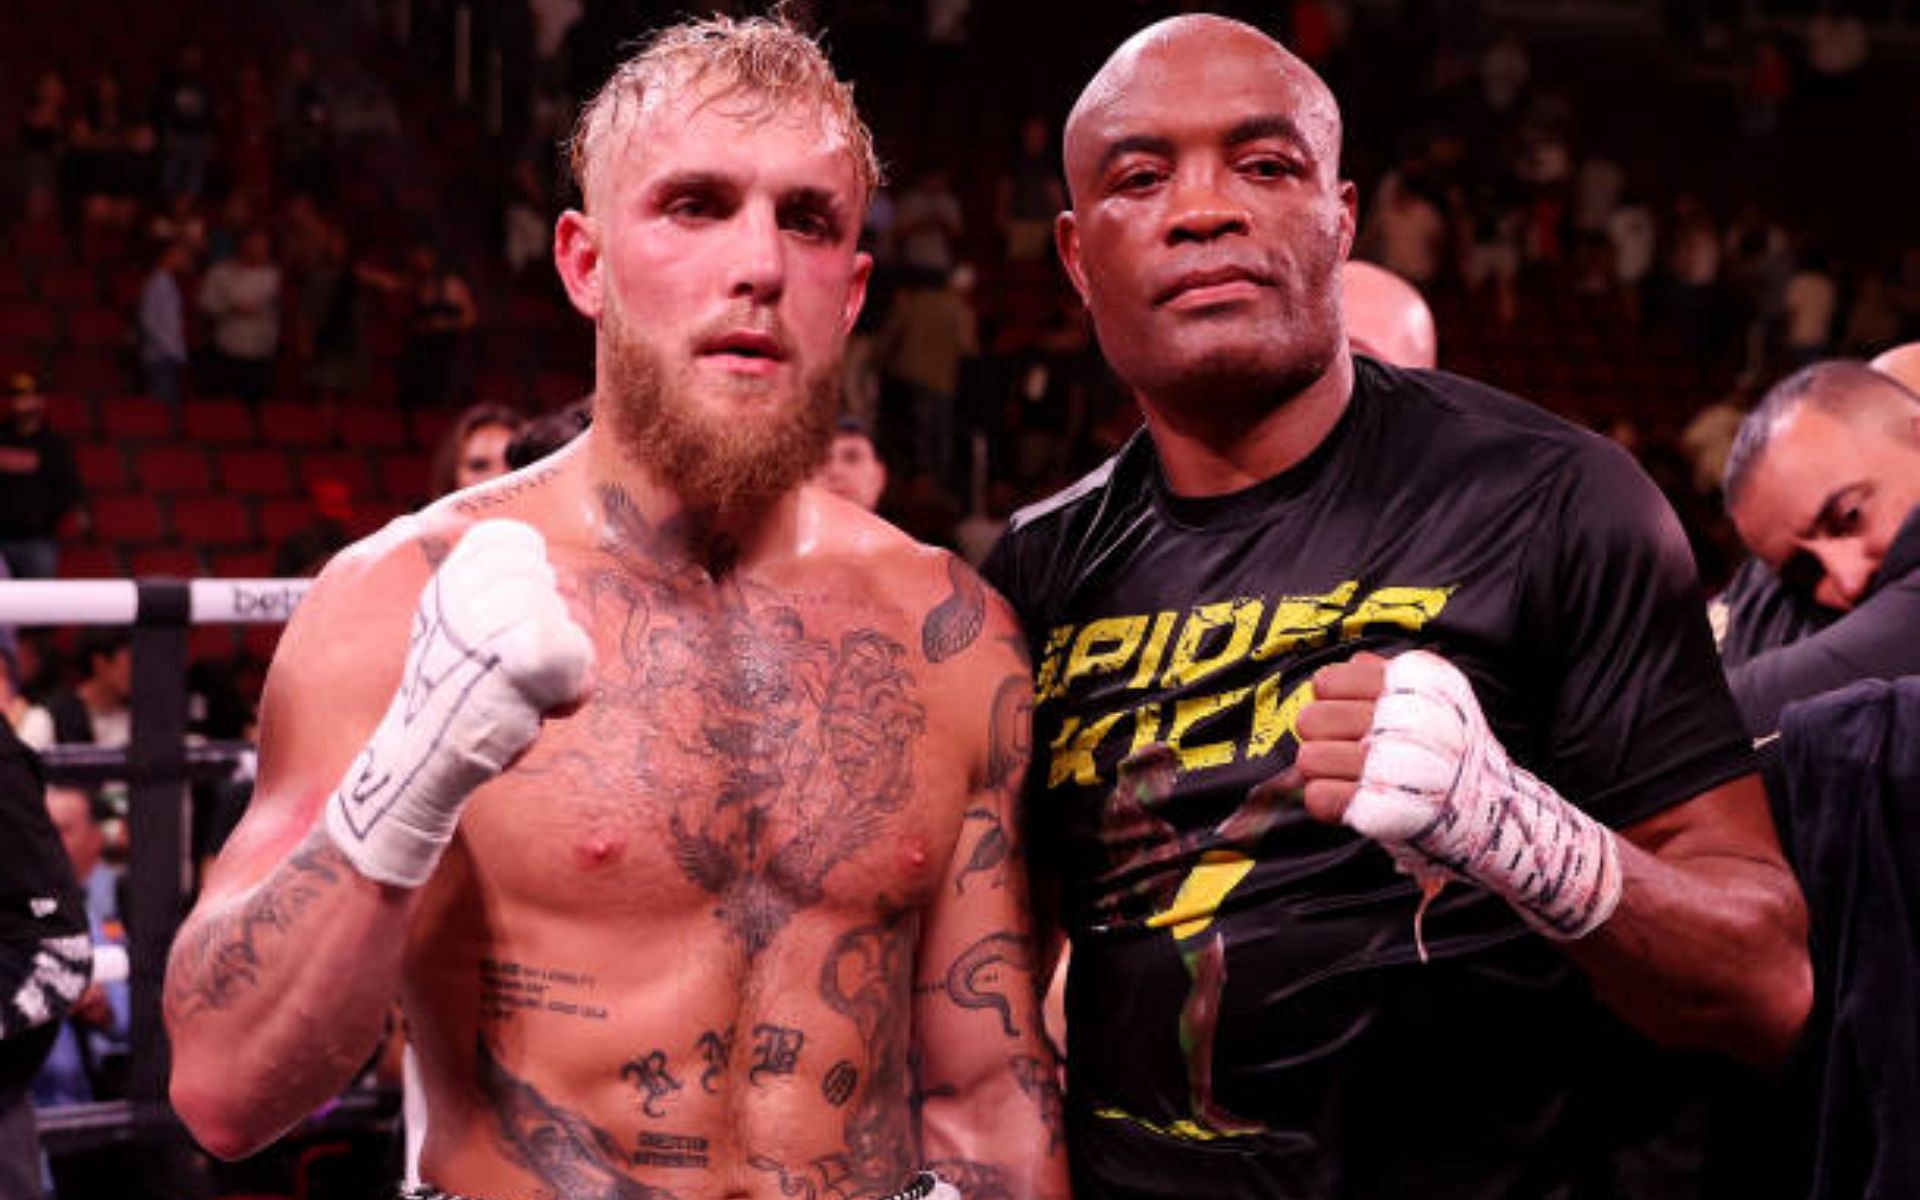 Jake Paul and Anderson Silva in the ring post-fight